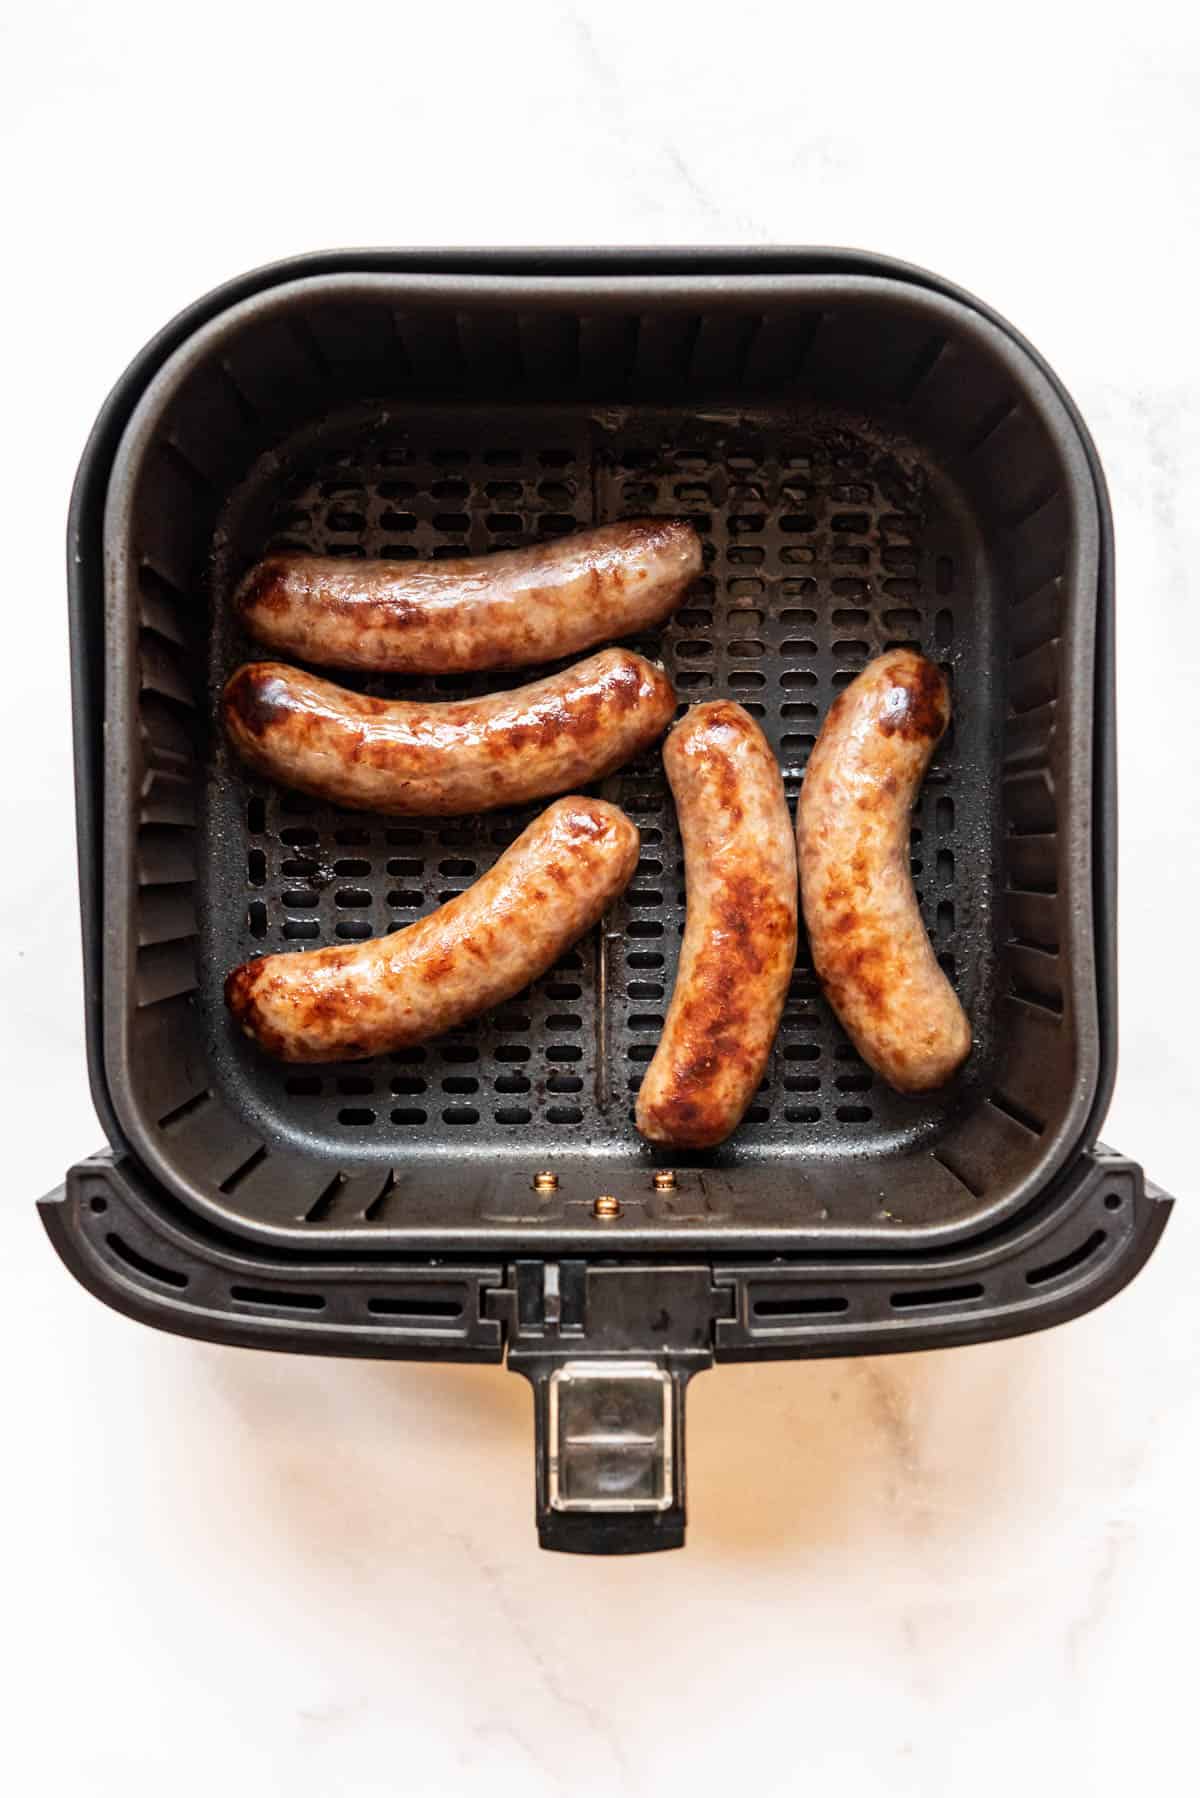 Top view of a square air fryer basket with cooked brats in it.